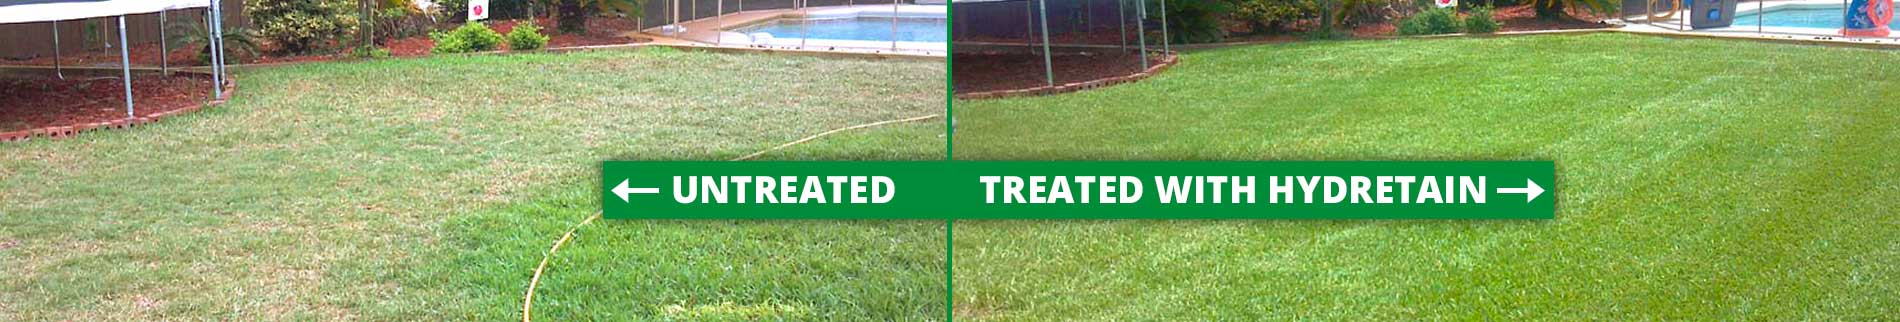 lawn grass before and after treatment with hydretain